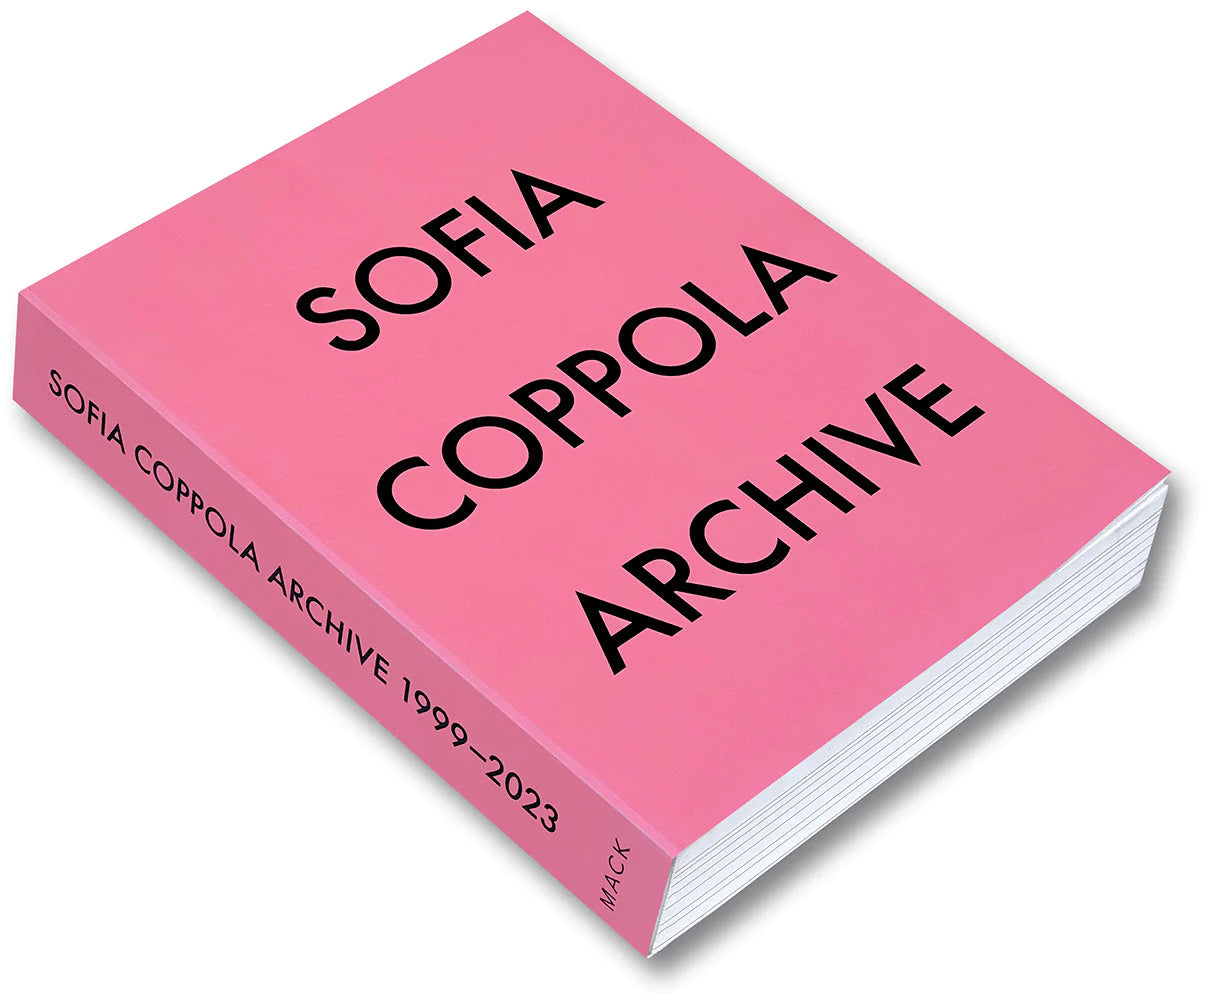 In pictures: Sofia Coppola opens up her personal archive